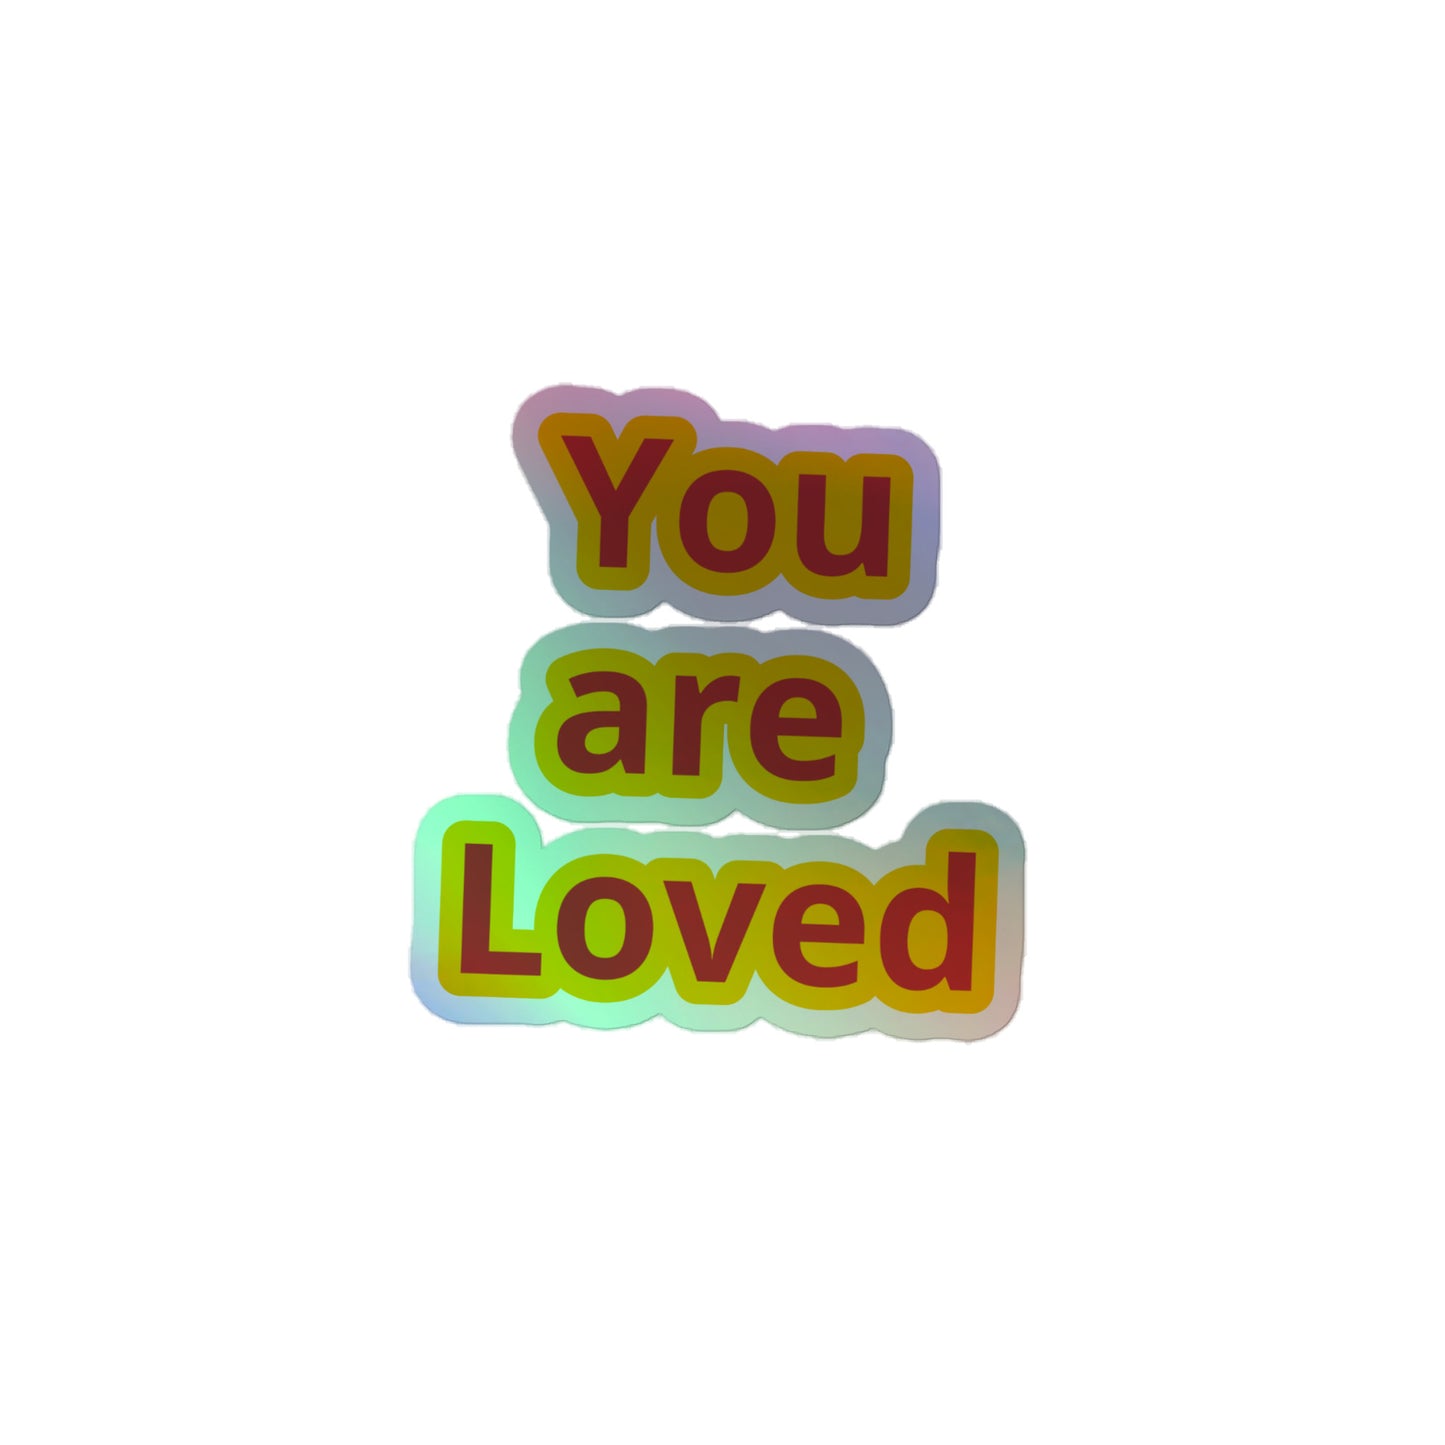 HolographicLove stickers